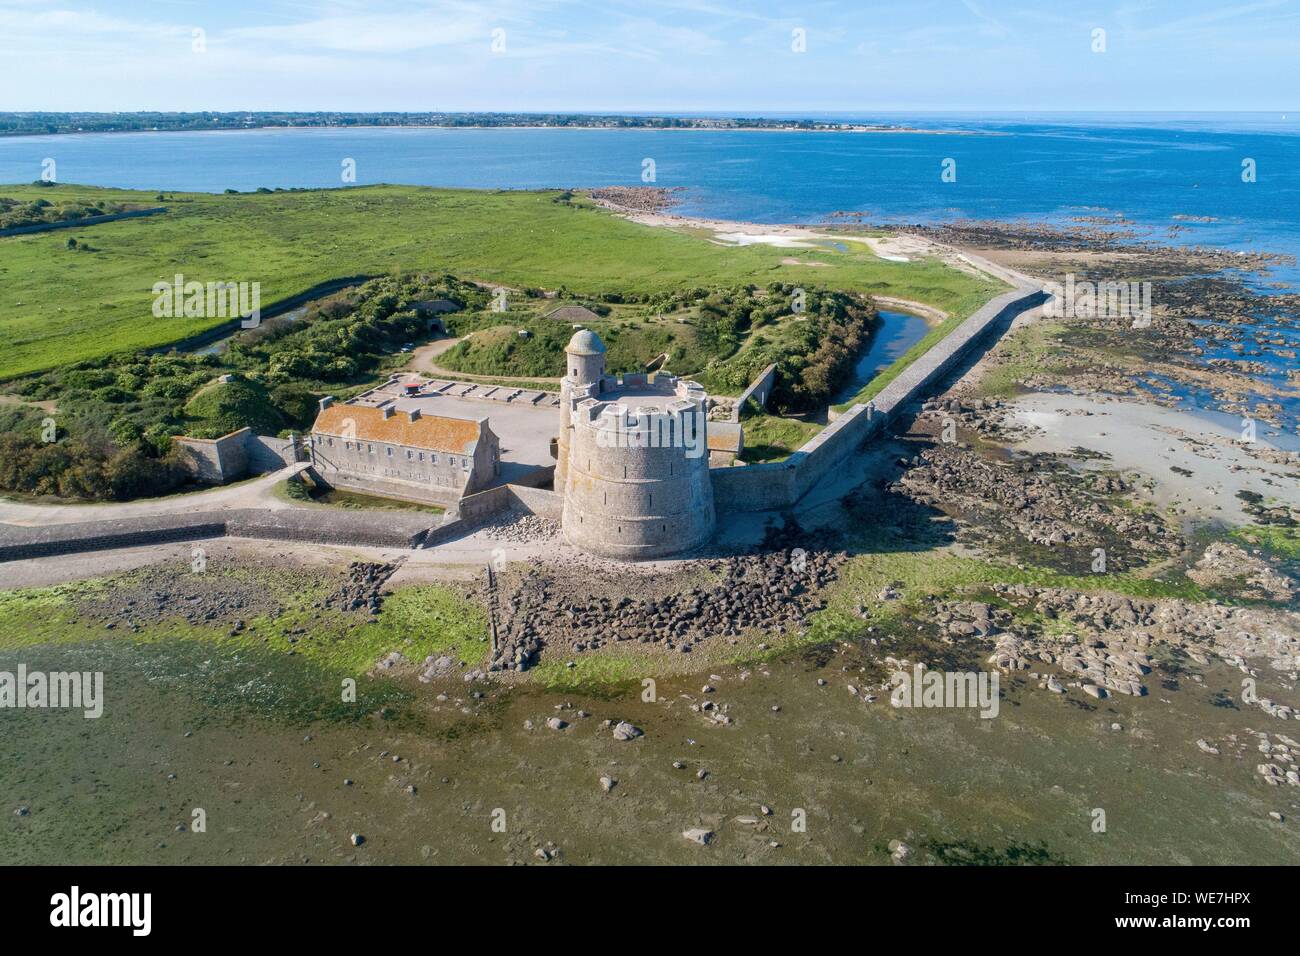 France, Manche, Saint Vaast la Hougue, la Hougue, his fort Vauban listed as World Heritage by UNESCO (aerial view) Stock Photo